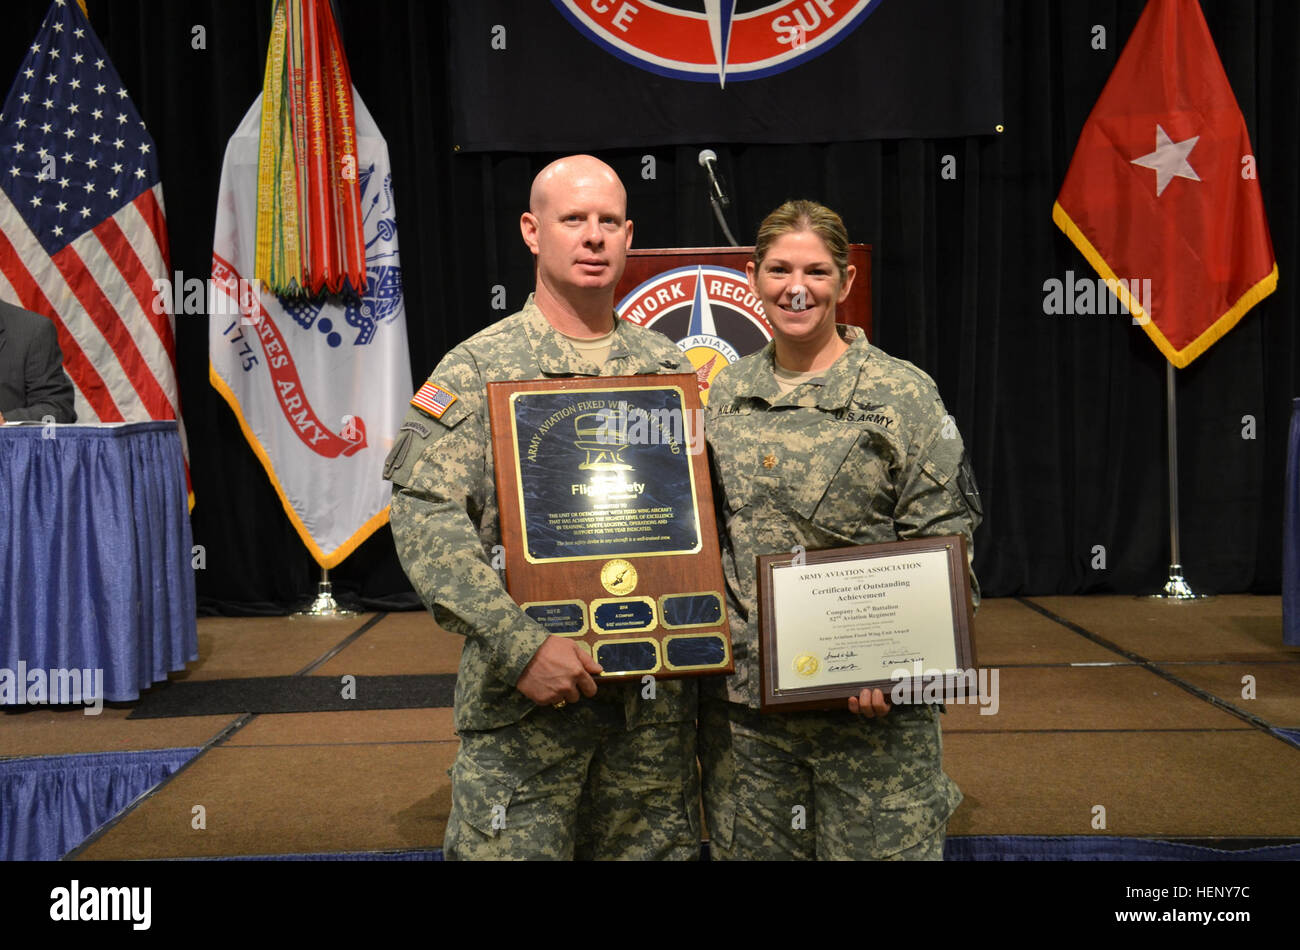 Maj. Courtney Kiluk and 1st. Sgt. Casey Roberts receive the Fixed-Wing Unit of the Year Award at the 2014 AAAA Annual Professional Forum Nov. 6 in Huntsville, Ala. Fixed-Wing Unit of the Year Award 141124-A-AB123-003 Stock Photo